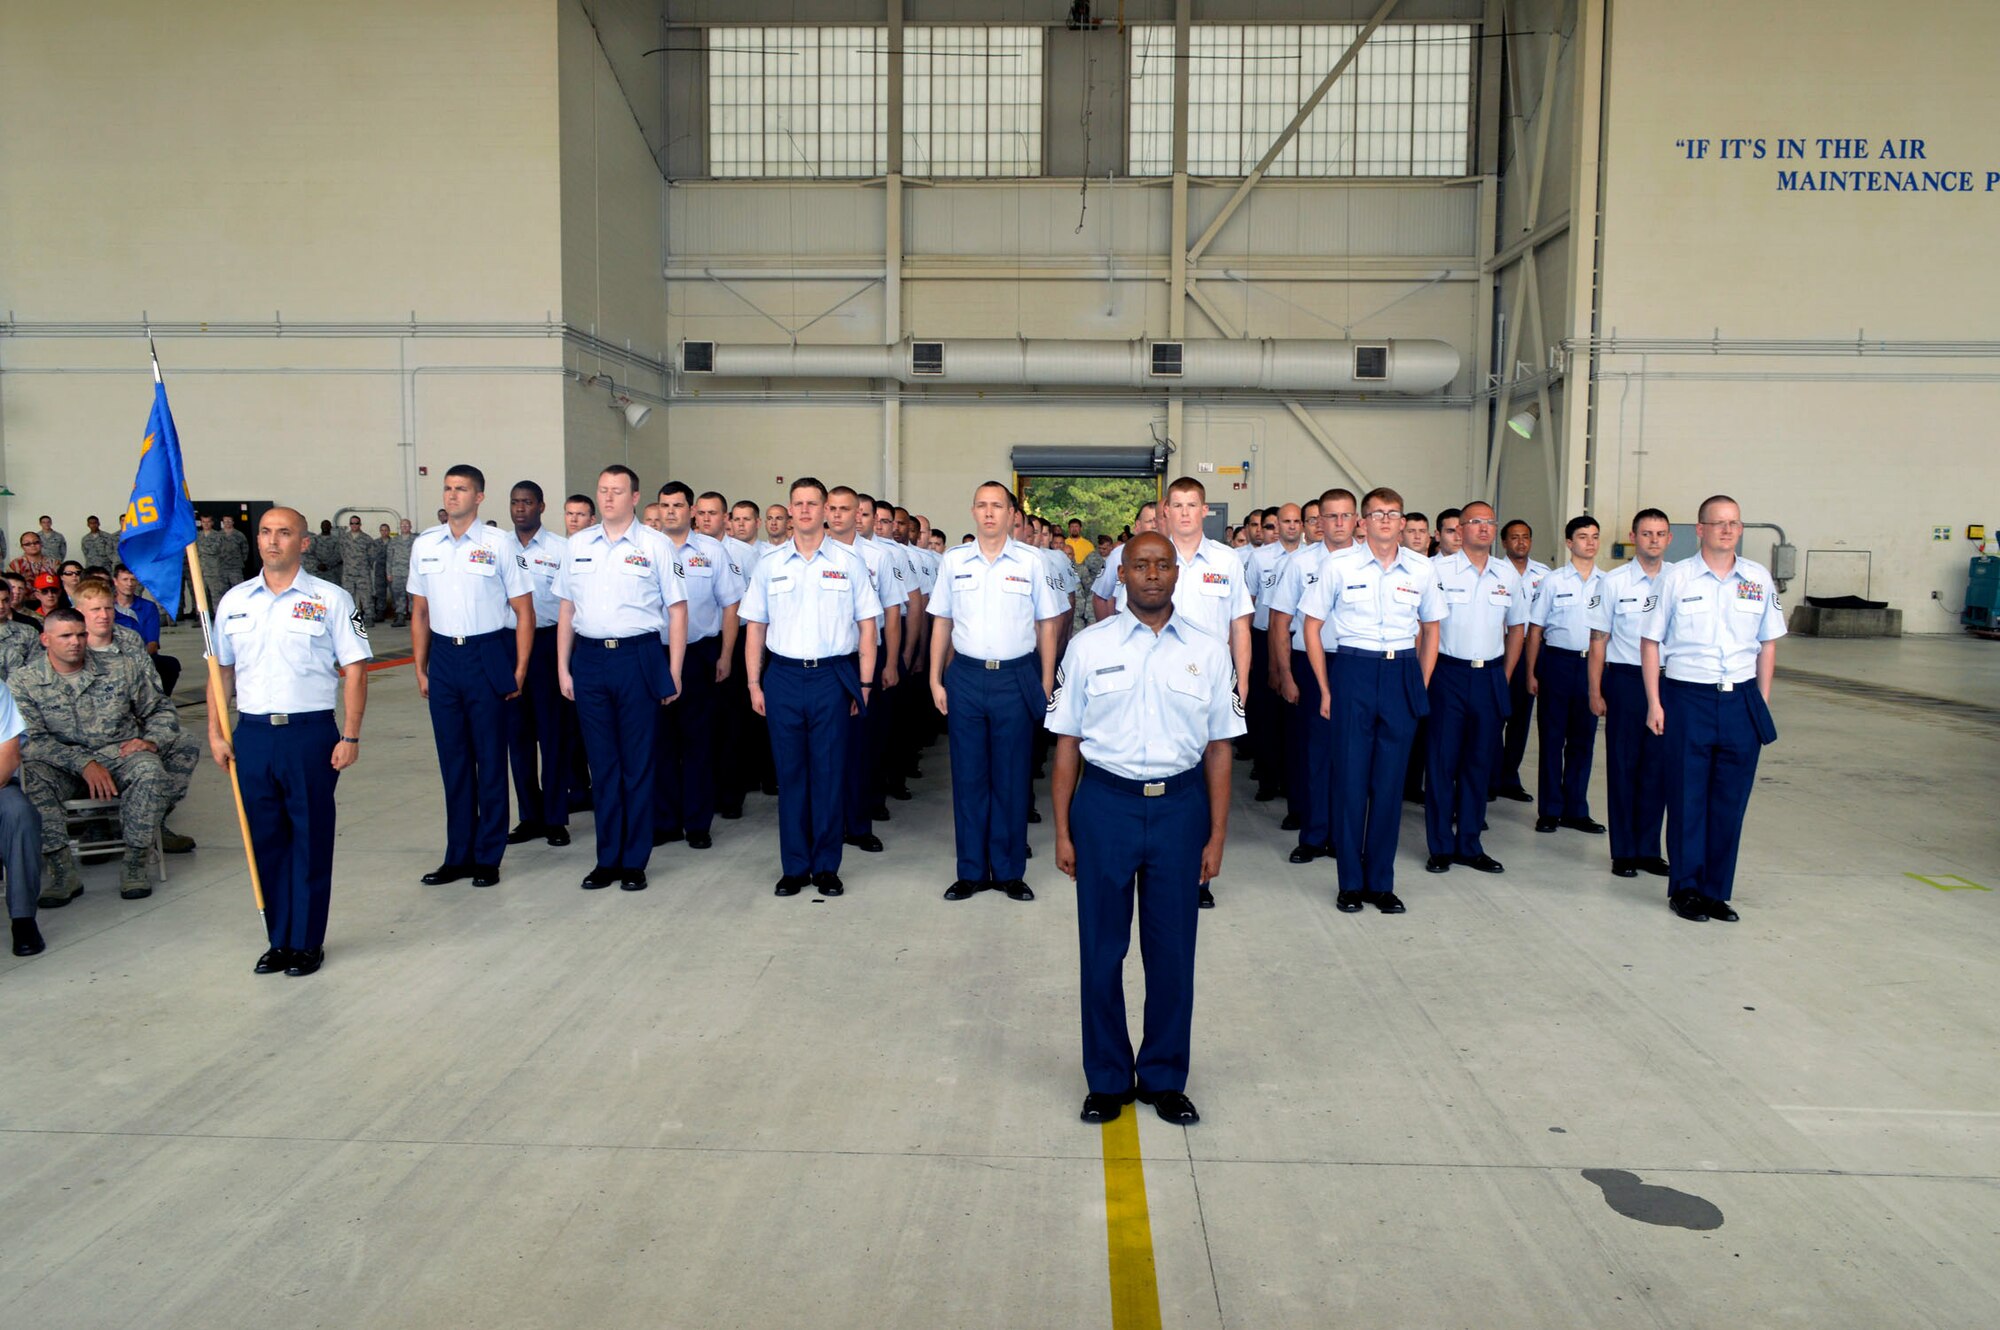 Chief Master Sgt. Kenneth Hubbard, 43rd Air Mobility Squadron superintendent, leads aircraft maintenance and aerial port Airmen who stand in formation together to form the new 43rd Air Mobility Squadron during the 43rd AMS activation ceremony July 1, 2015, at Pope Army Airfield, North Carolina. The 43rd Aircraft Maintenance Squadron and 3rd Aerial Port Squadron were inactivated and cased their guidons during the ceremony. (U.S. Air Force photo/Marvin Krause)